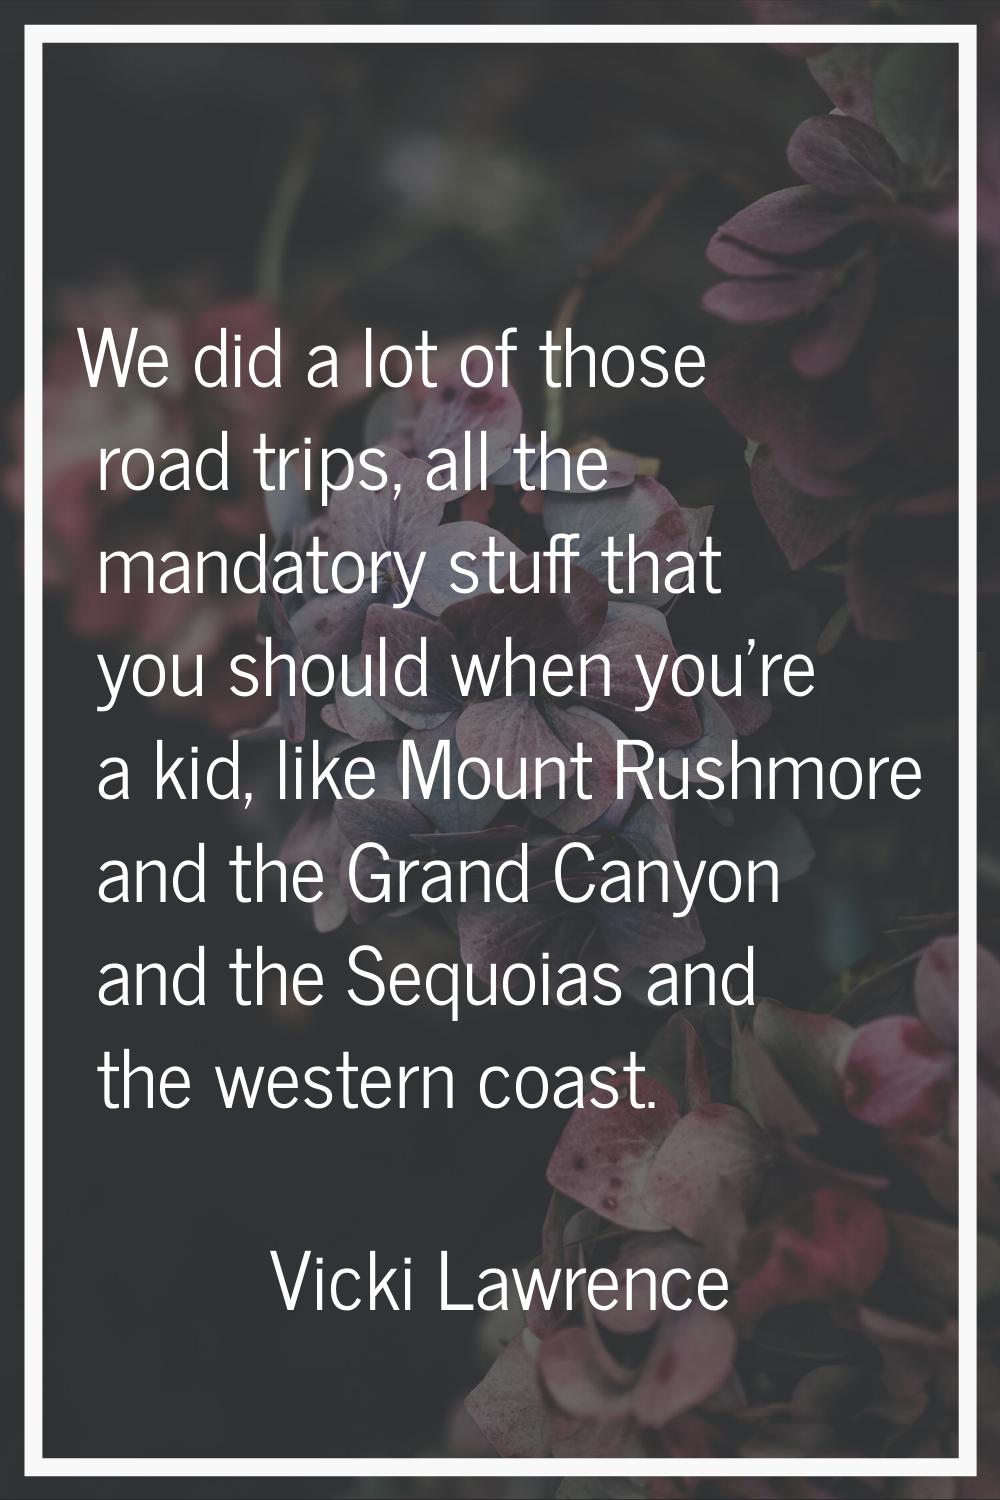 We did a lot of those road trips, all the mandatory stuff that you should when you're a kid, like M